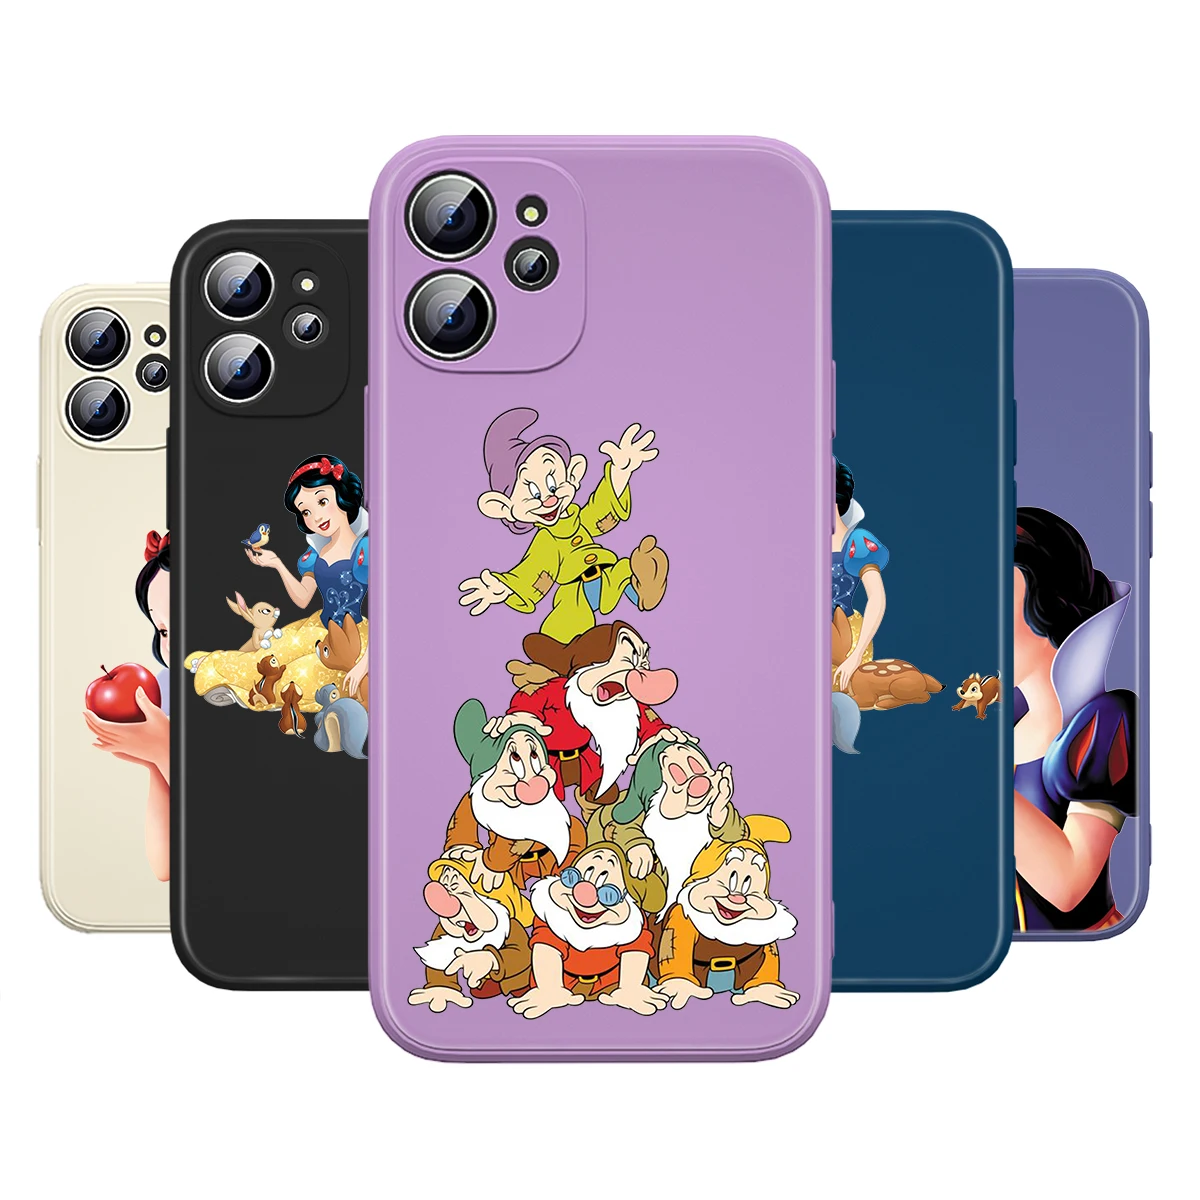 Snow White and the Seven Dwarfs Silicone Phone Case Cover For iPhone 6 7 8 X XR 11 12 13 Pro MAX